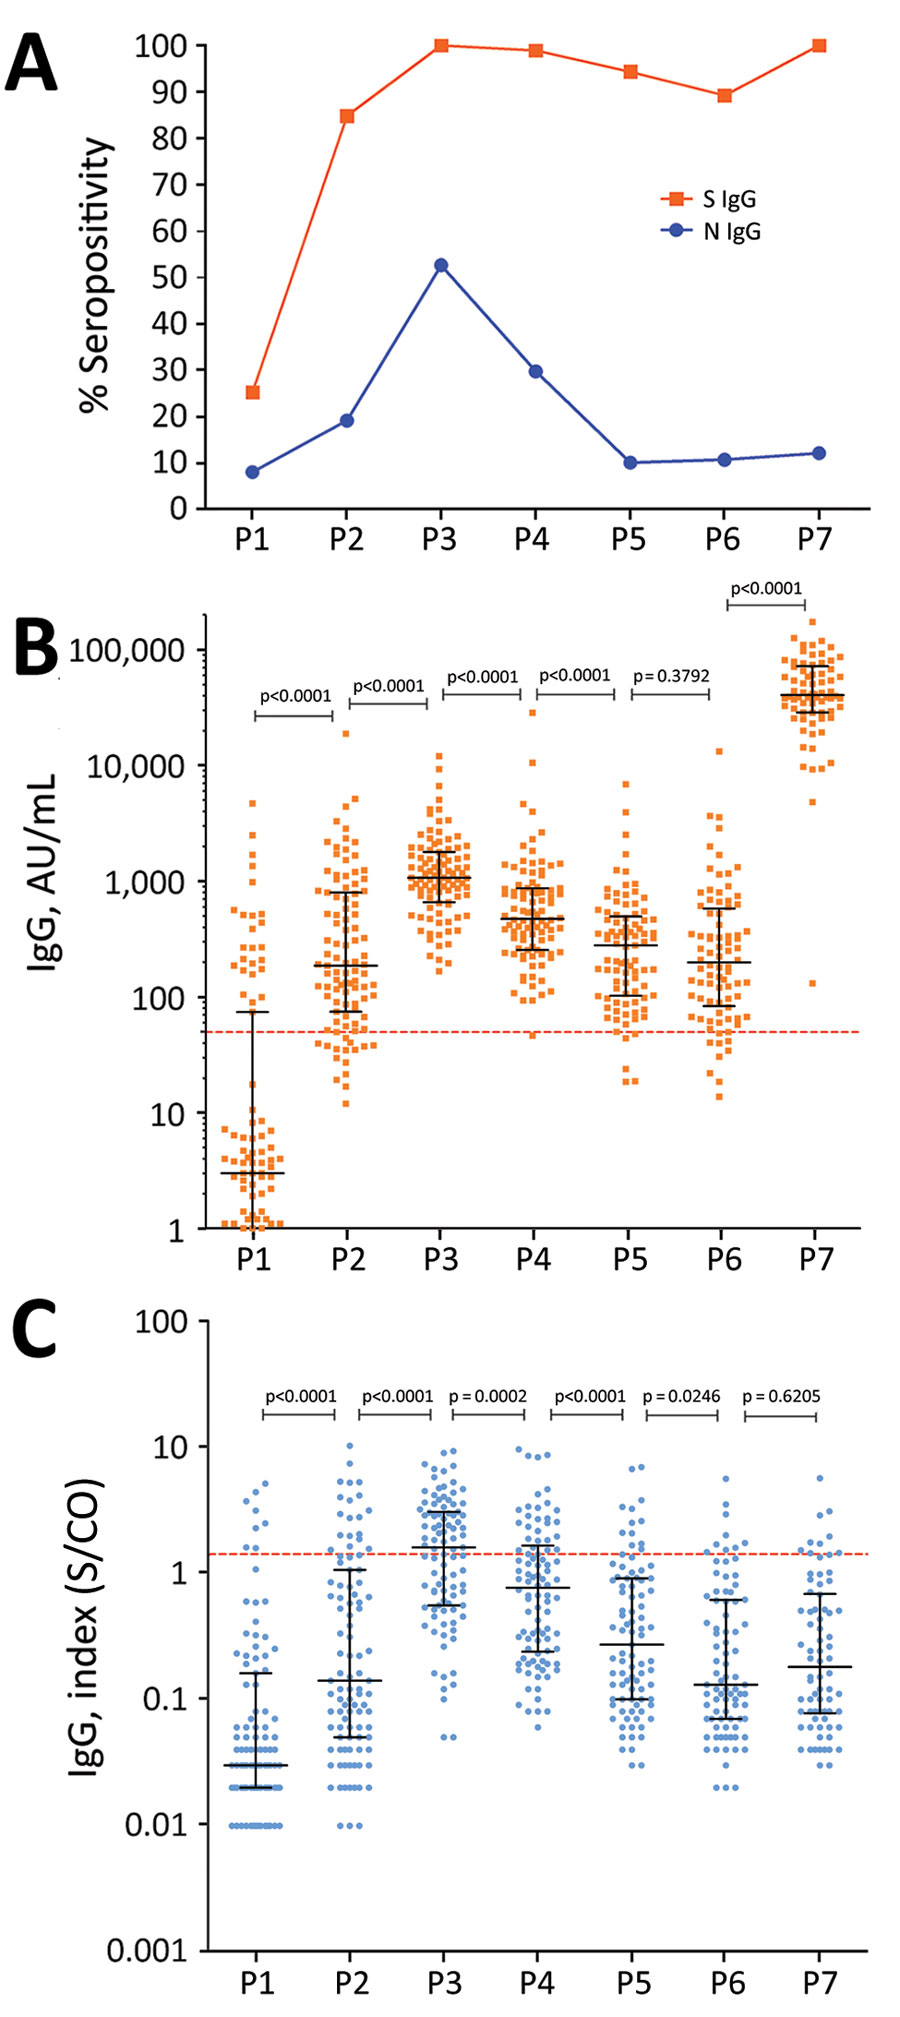 Antibody response over time in a cohort of healthcare workers vaccinated with 2 doses of CoronaVac vaccine (https://www.sinovac.com) followed by a BNT162b2 vaccine (Pfizer-BioNTech, https://www.pfizer.com) booster dose. A) S and N IgG seropositivity. B) S IgG levels. C) N IgG levels. Antibody responses were evaluated before vaccination (timepoint P1); 28 days after the first dose of CoronaVac vaccine (P2); 30 (P3) 90 (P4), 180 (P5), and 230 (P6) days after the second dose of CoronaVac vaccine; and 15 days after the booster dose with BNT162b2 vaccine (P7). For panels B and C, black lines indicate median levels values and error bars interquartile ranges; horizontal dotted lines indicate cutoff values. Statistical analysis performed using the Kruskal–Wallis test with subsequent Dunn’s multiple testing correction. N, nucleocapsid protein; S, spike protein; S/CO, signal-to-cutoff ratio.